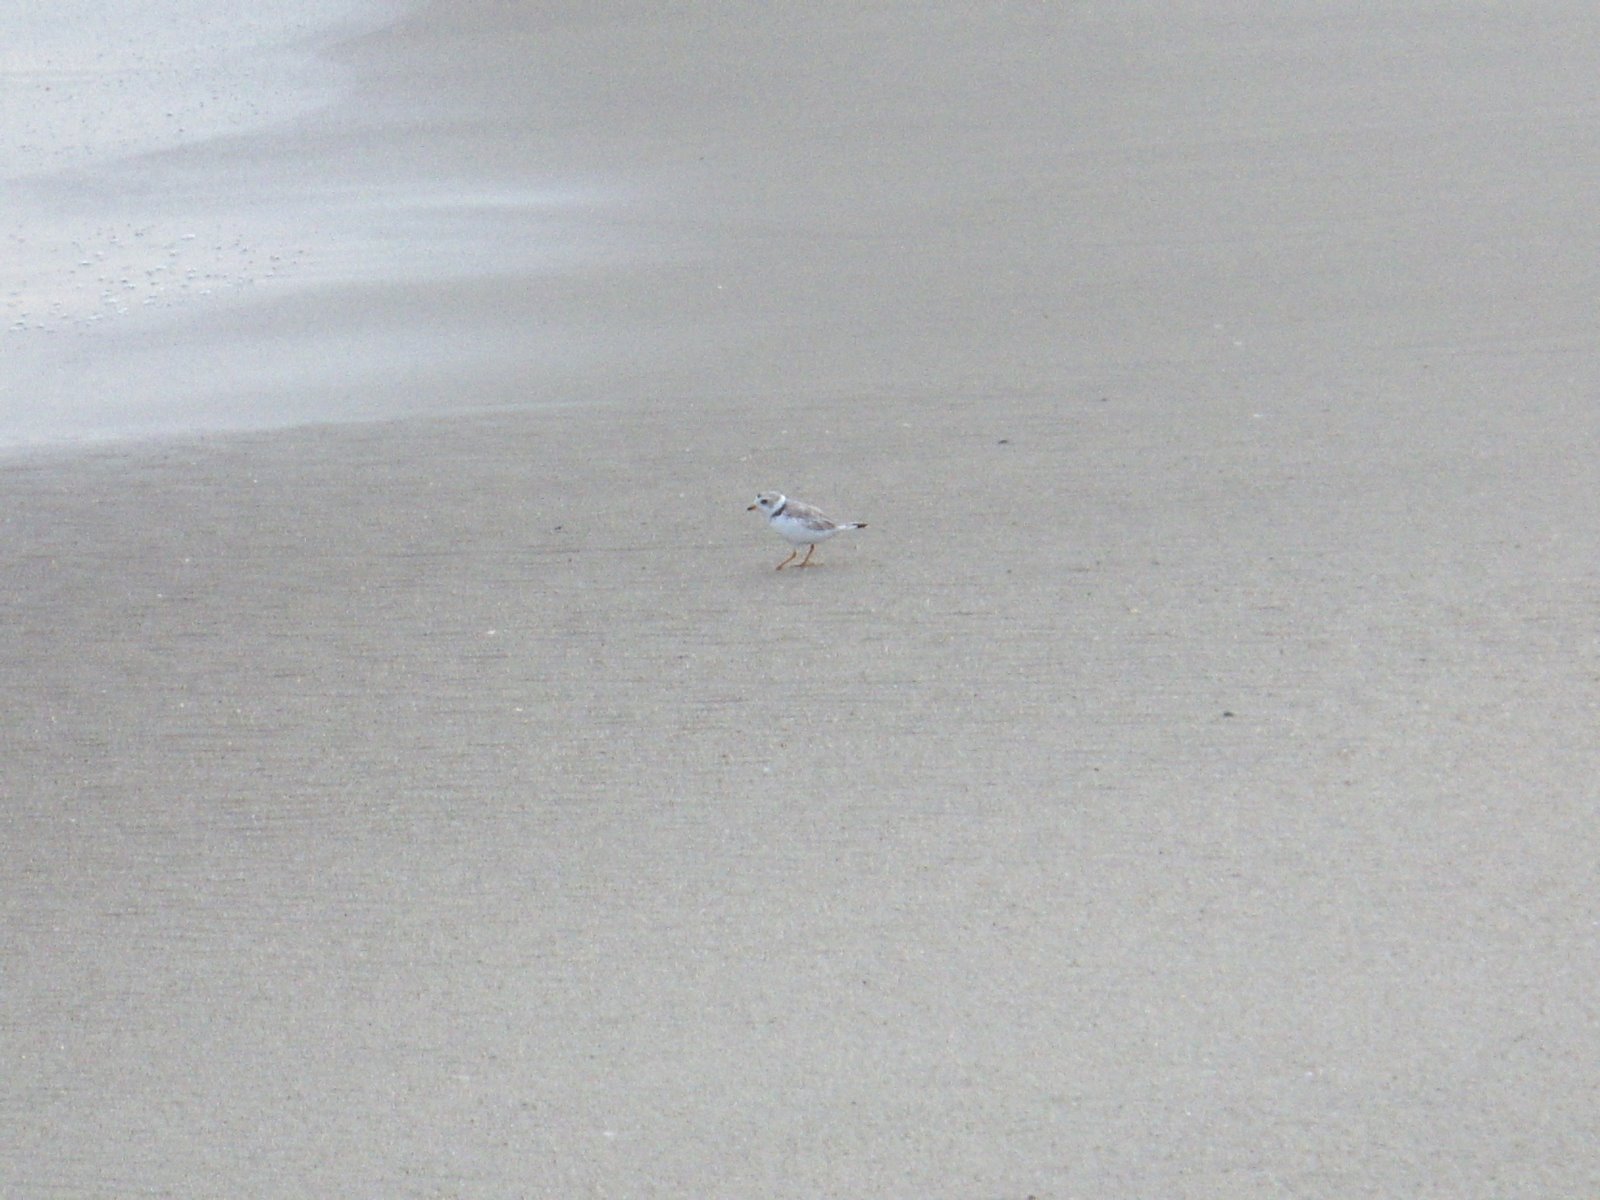 [Cape+May+Point+-+Piping+Plover+-+7-14-08.jpg]